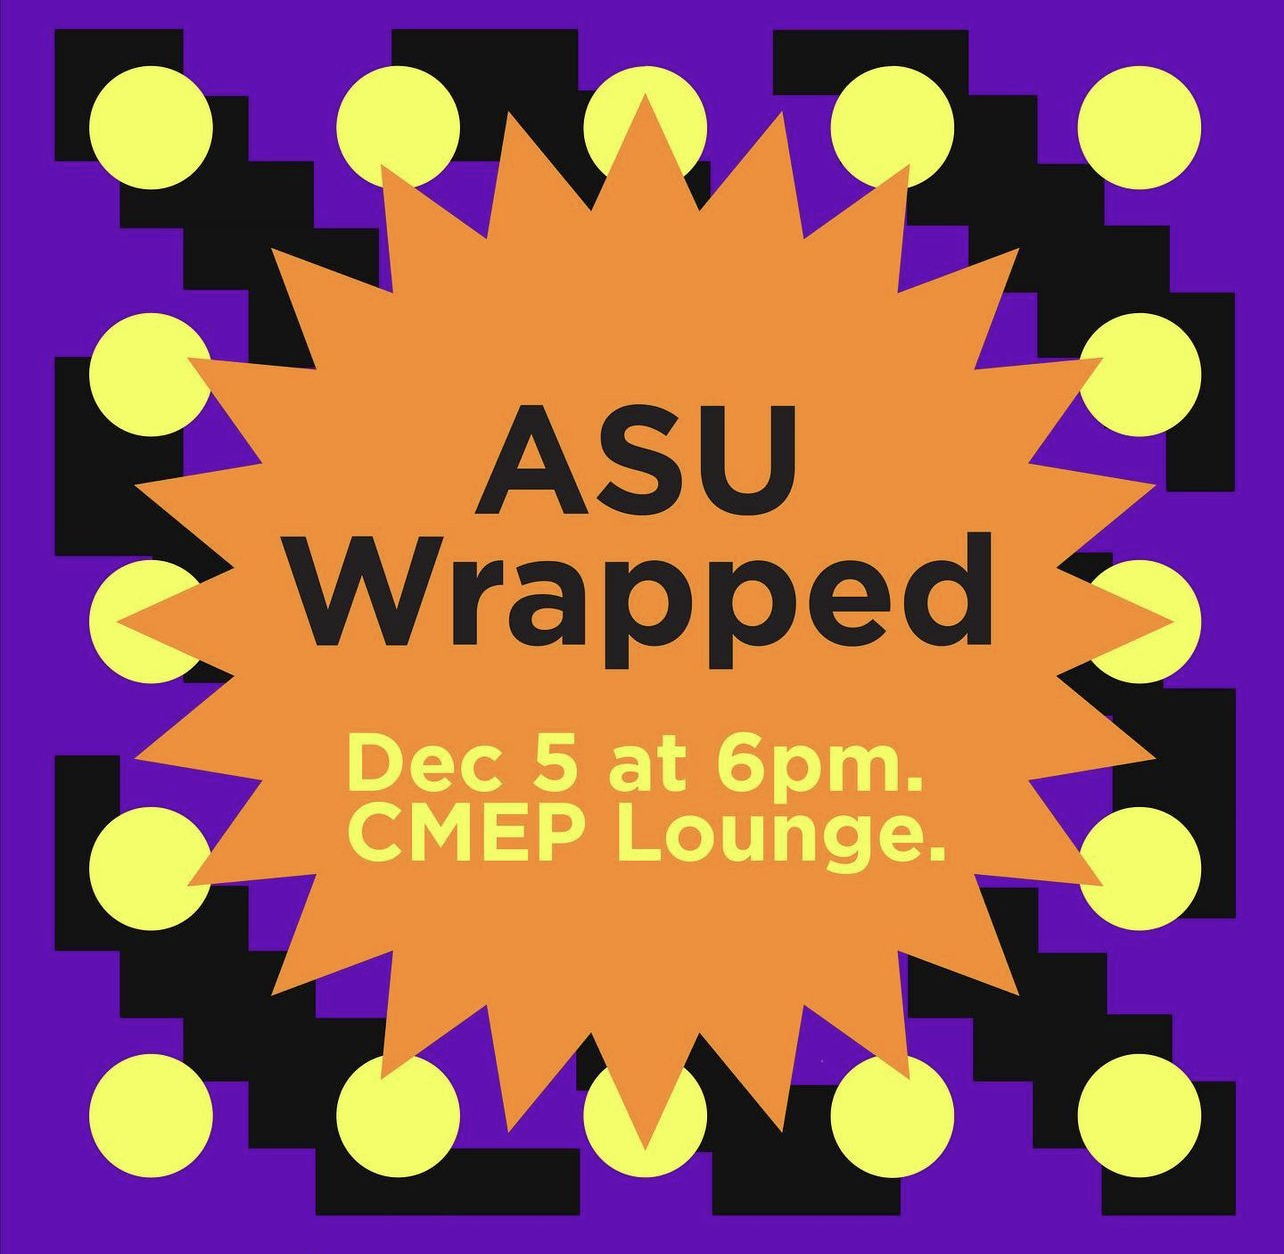 A marketing poster for an ASU Wrapped event.